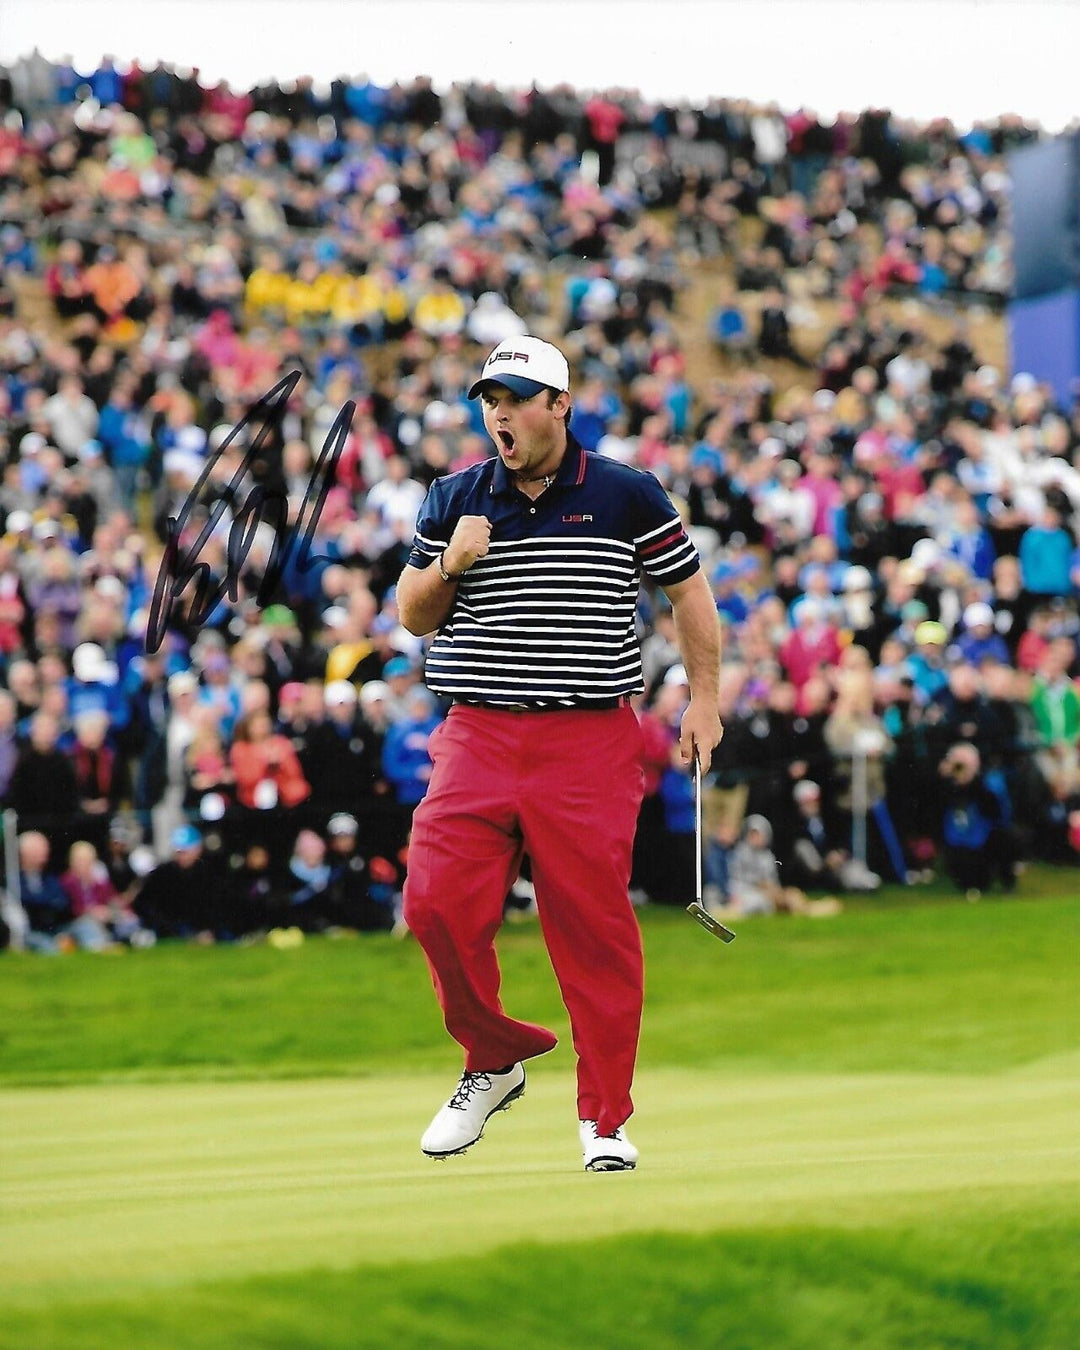 PATRICK REED SIGNED AUTOGRAPHED 8X10 PHOTO GOLF 2018 MASTERS RYDER CUP USA COA ! Image 1